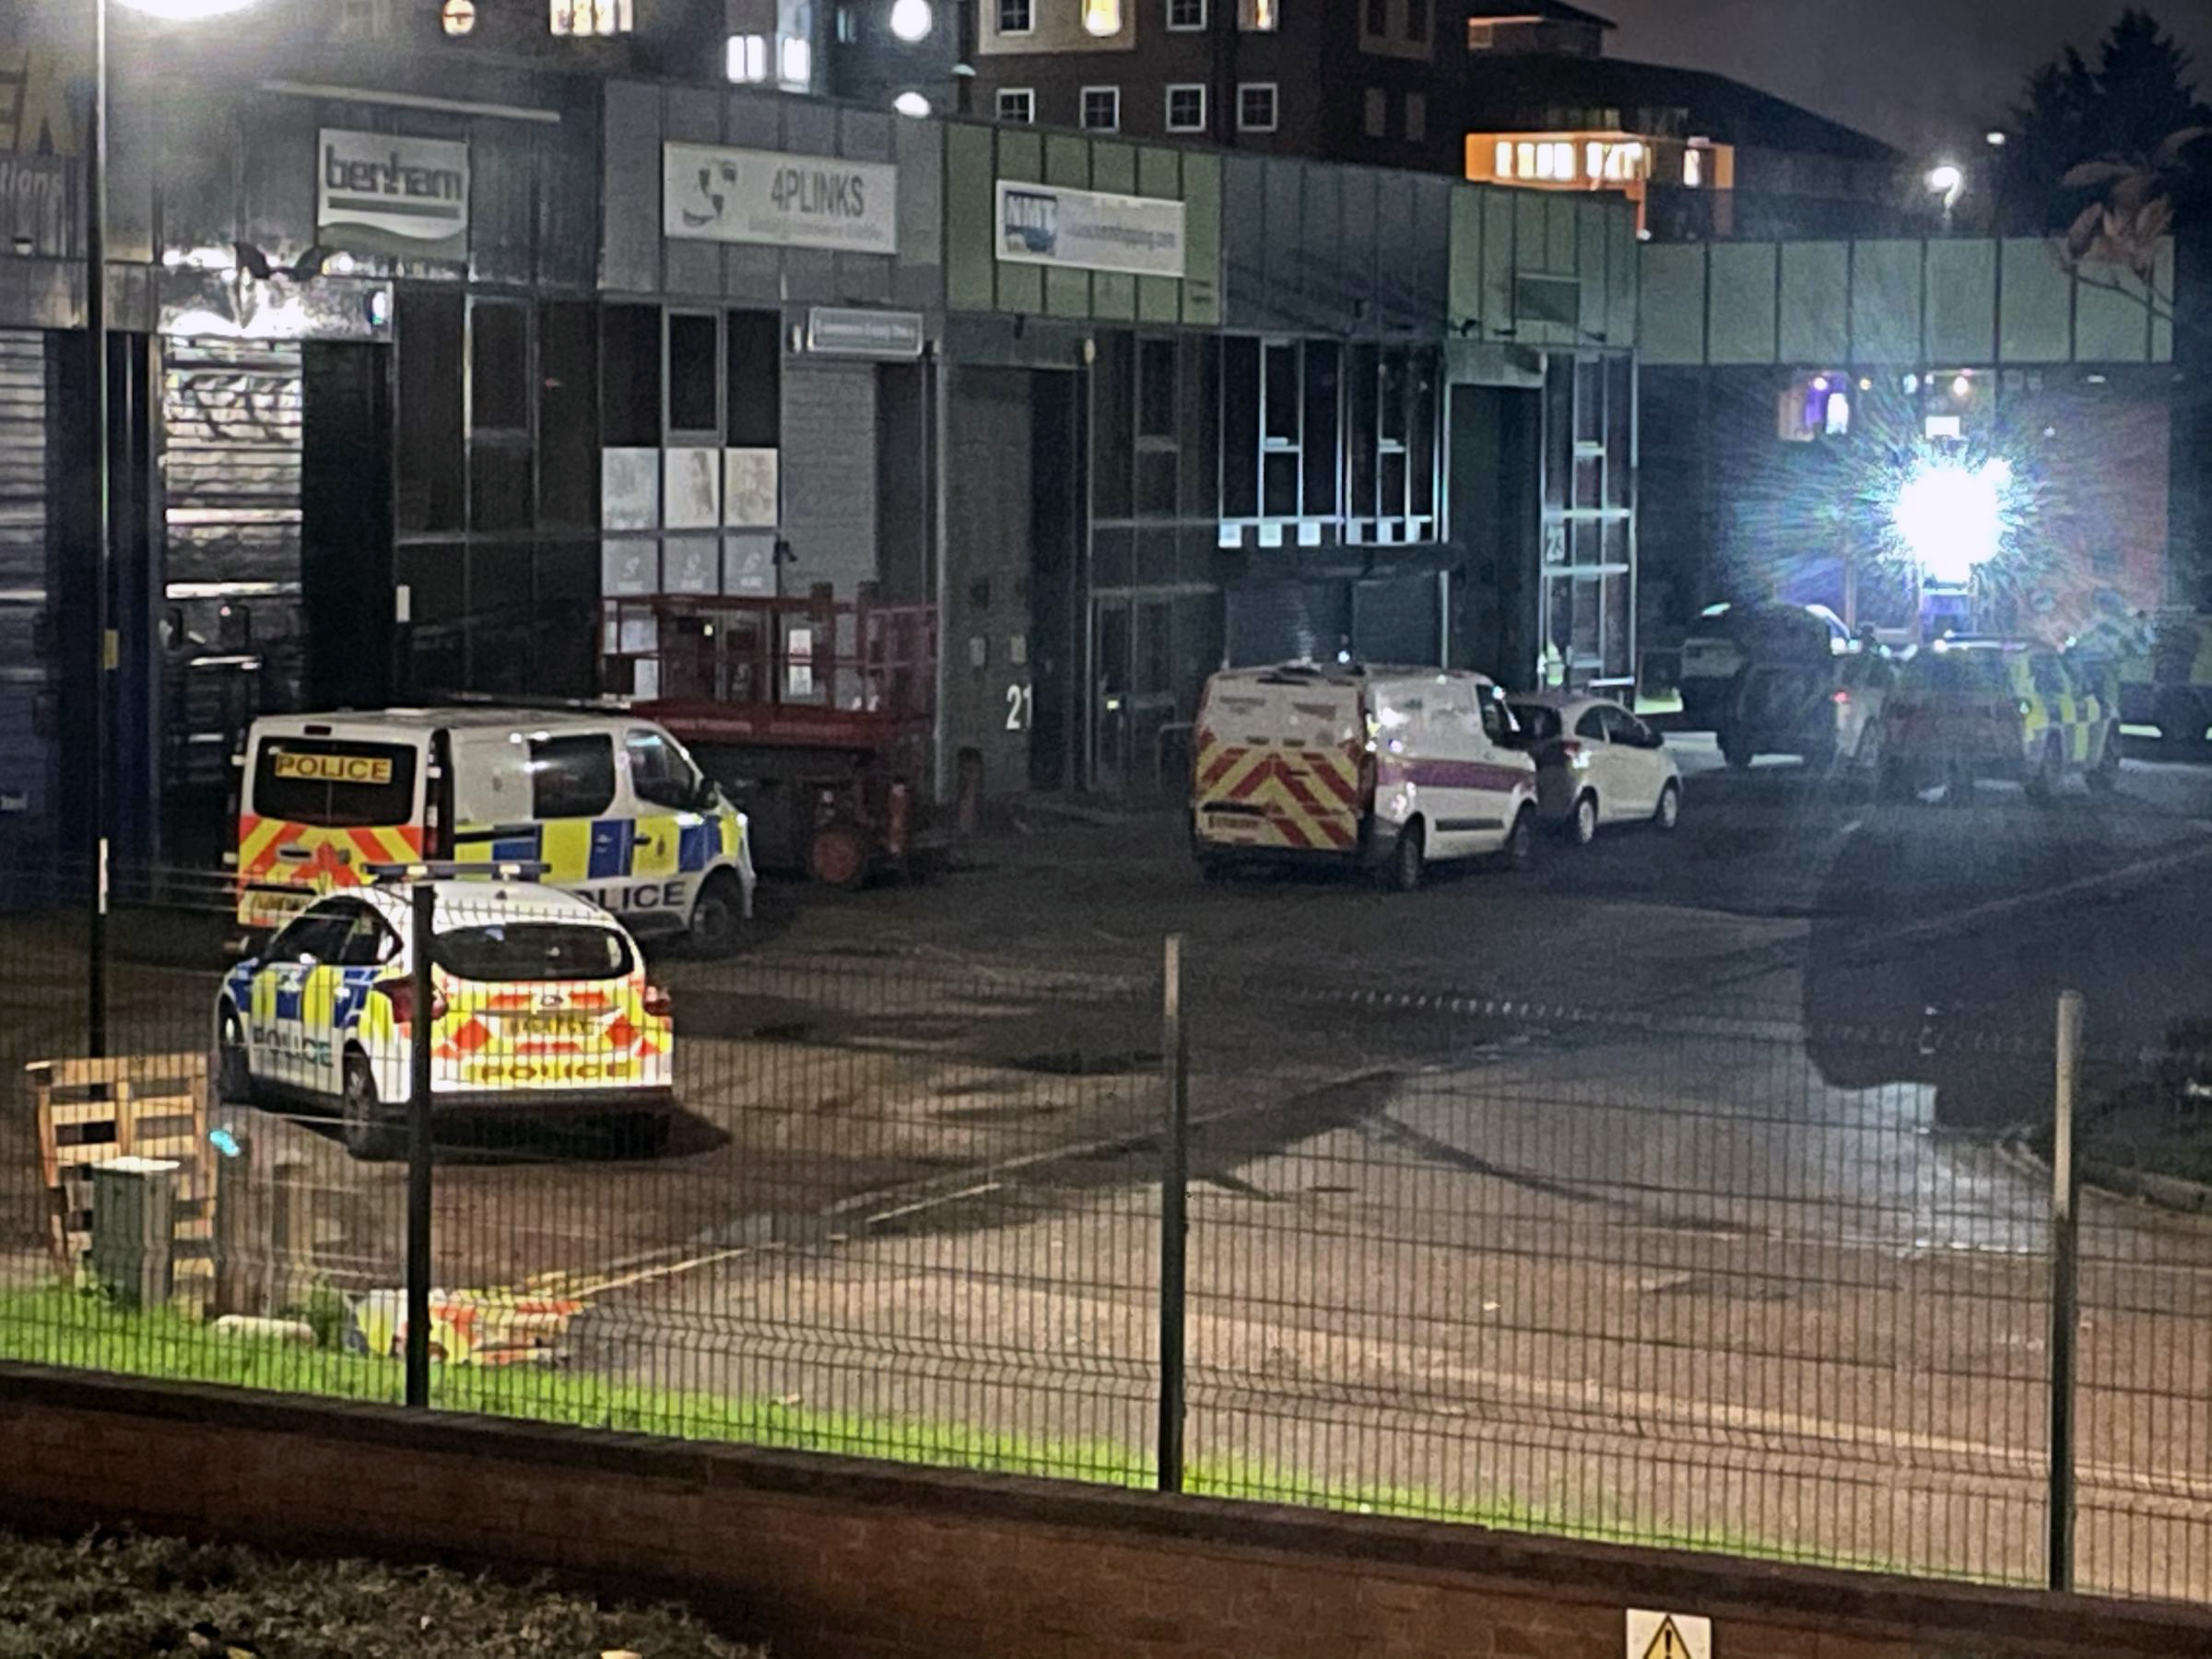 Armed police were called after a man pulled out a gun in Pizza House takeaway, Southampton